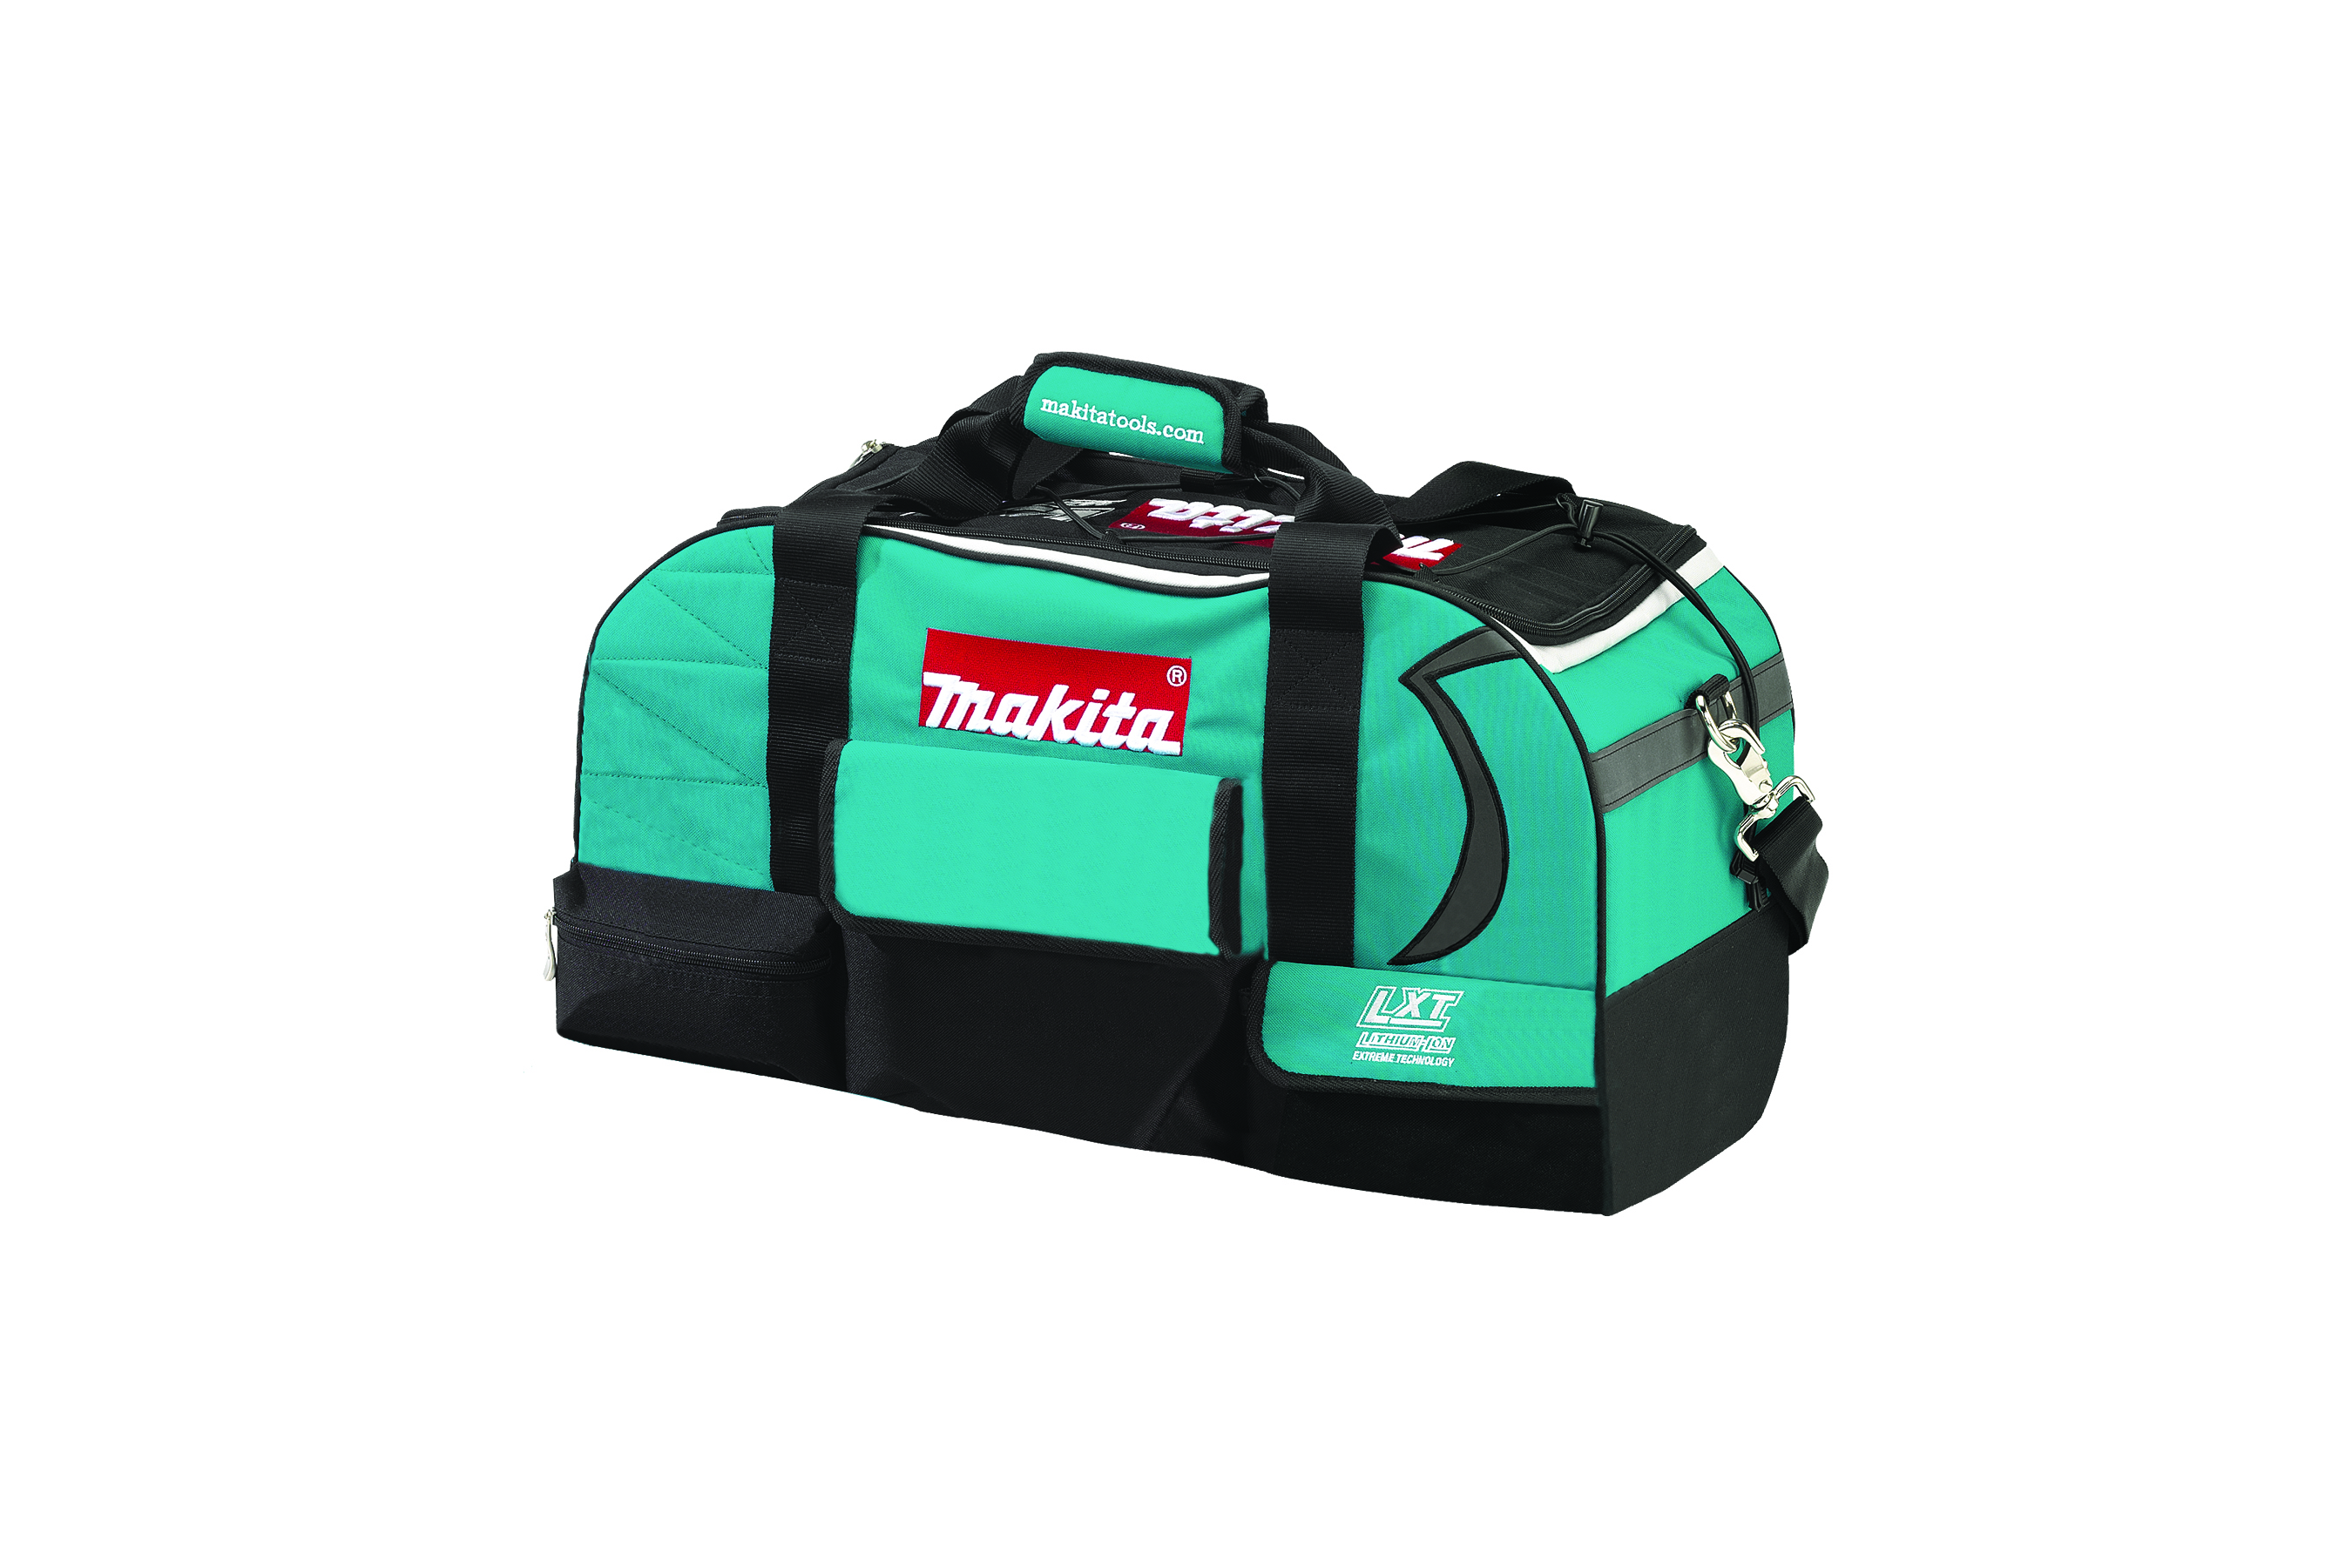 A teal and black tool bag with a red "Makita" label. Image by Makita Tools.